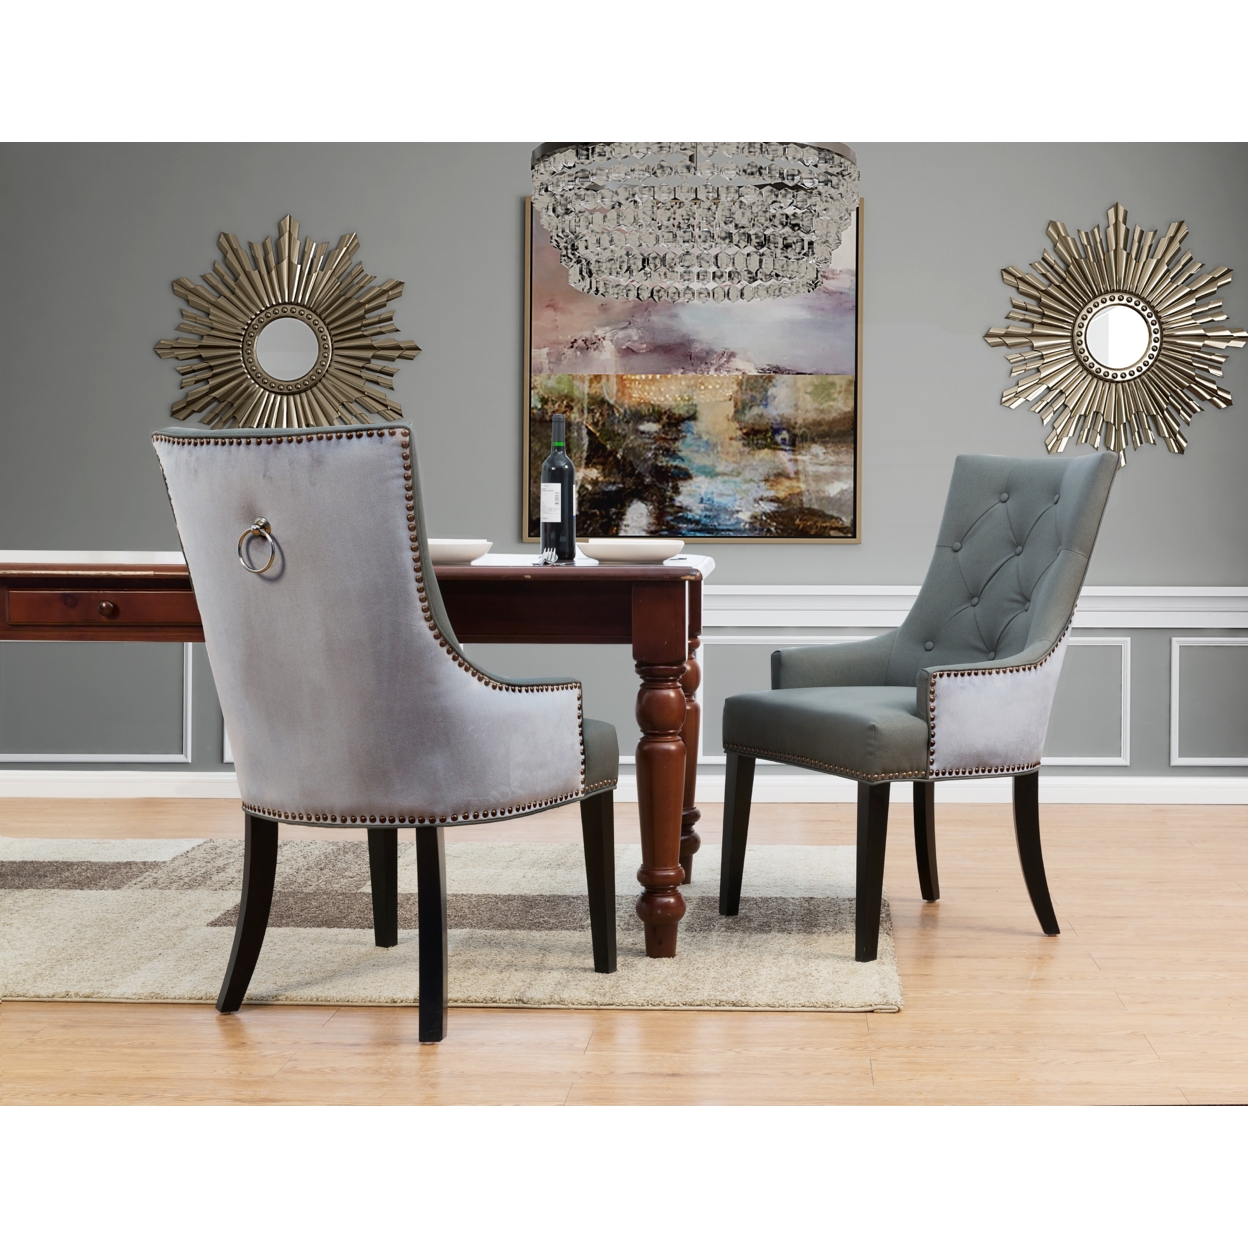 Gideon 2 Pc. Dining Side Chair PU Leather Velvet Polished Brass Nailheads Espresso Finished Wooden Legs - Gray